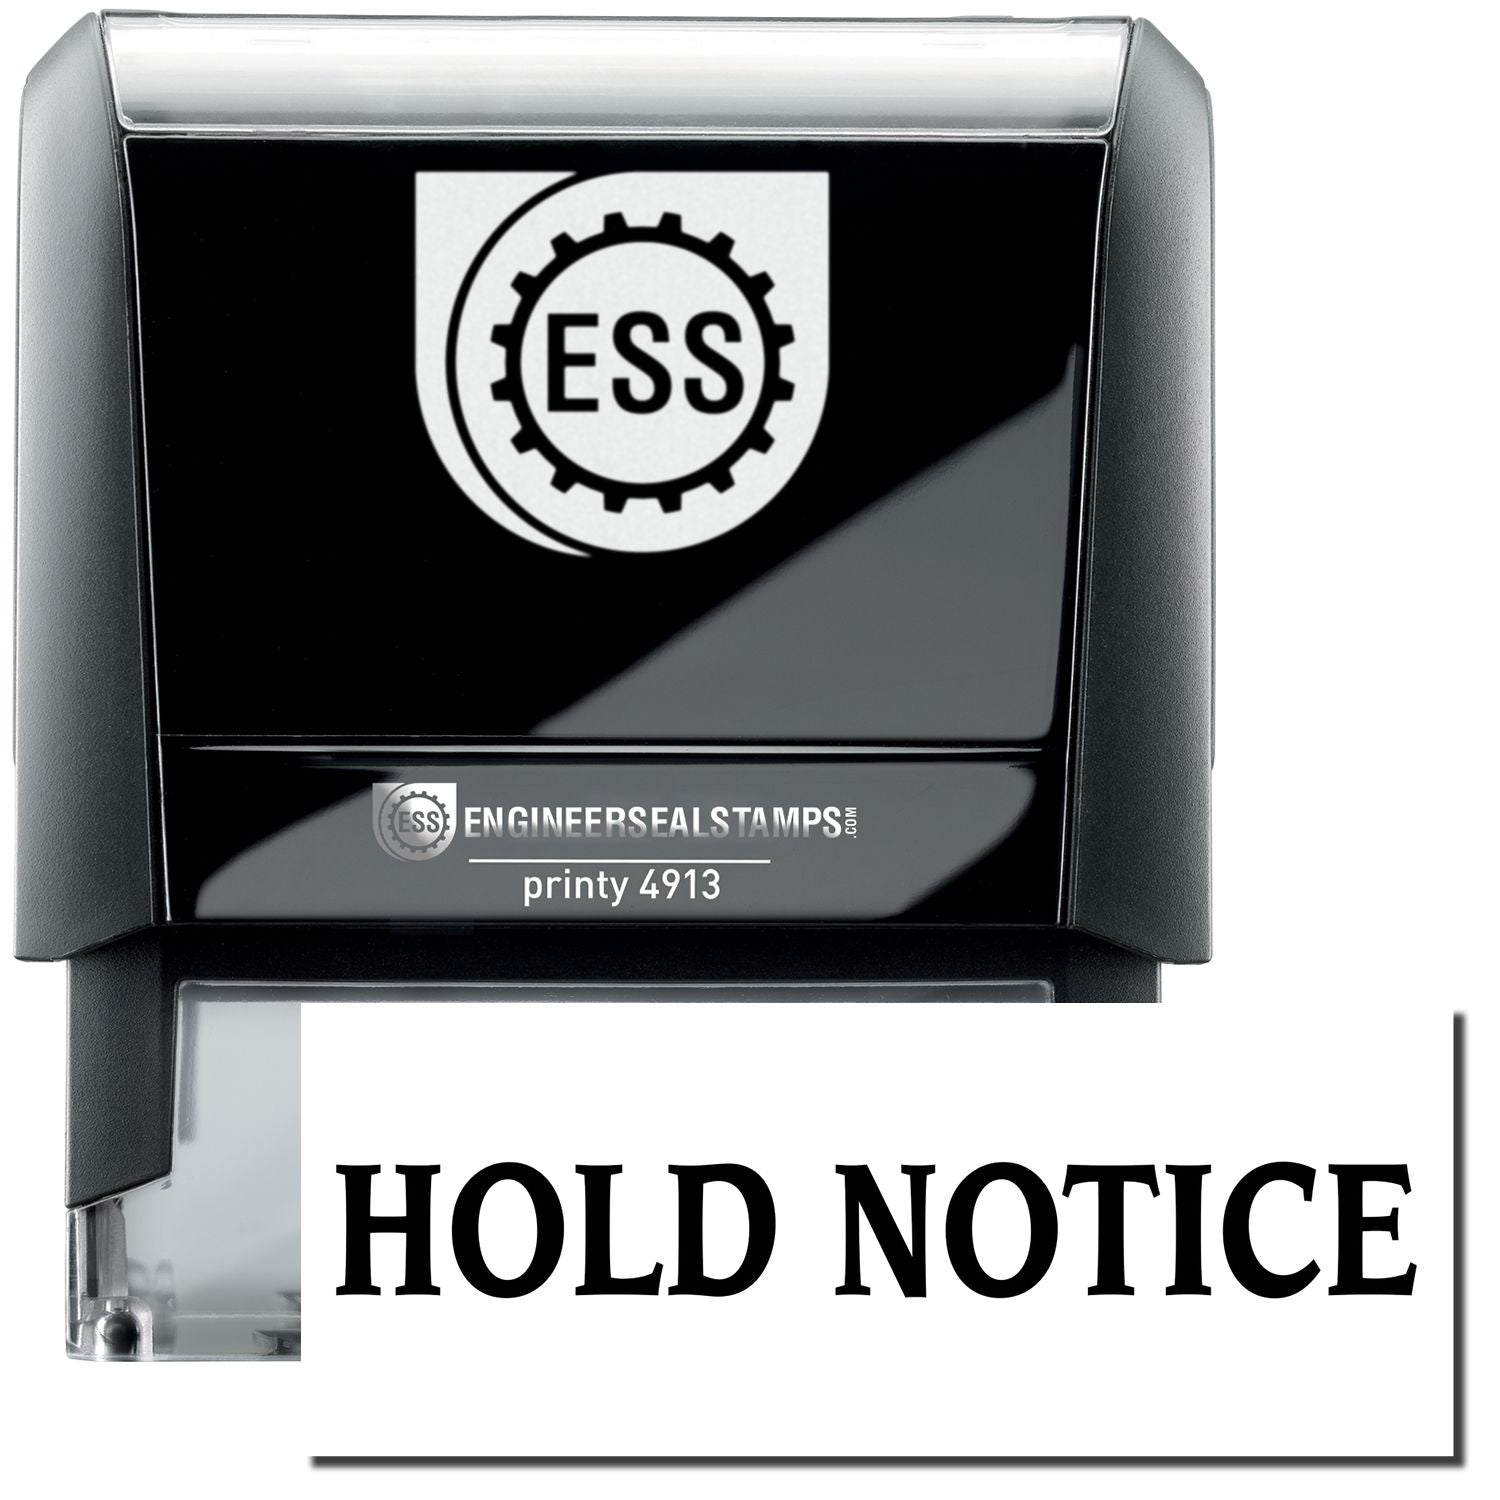 A self-inking stamp with a stamped image showing how the text "HOLD NOTICE" in a large bold font is displayed by it.